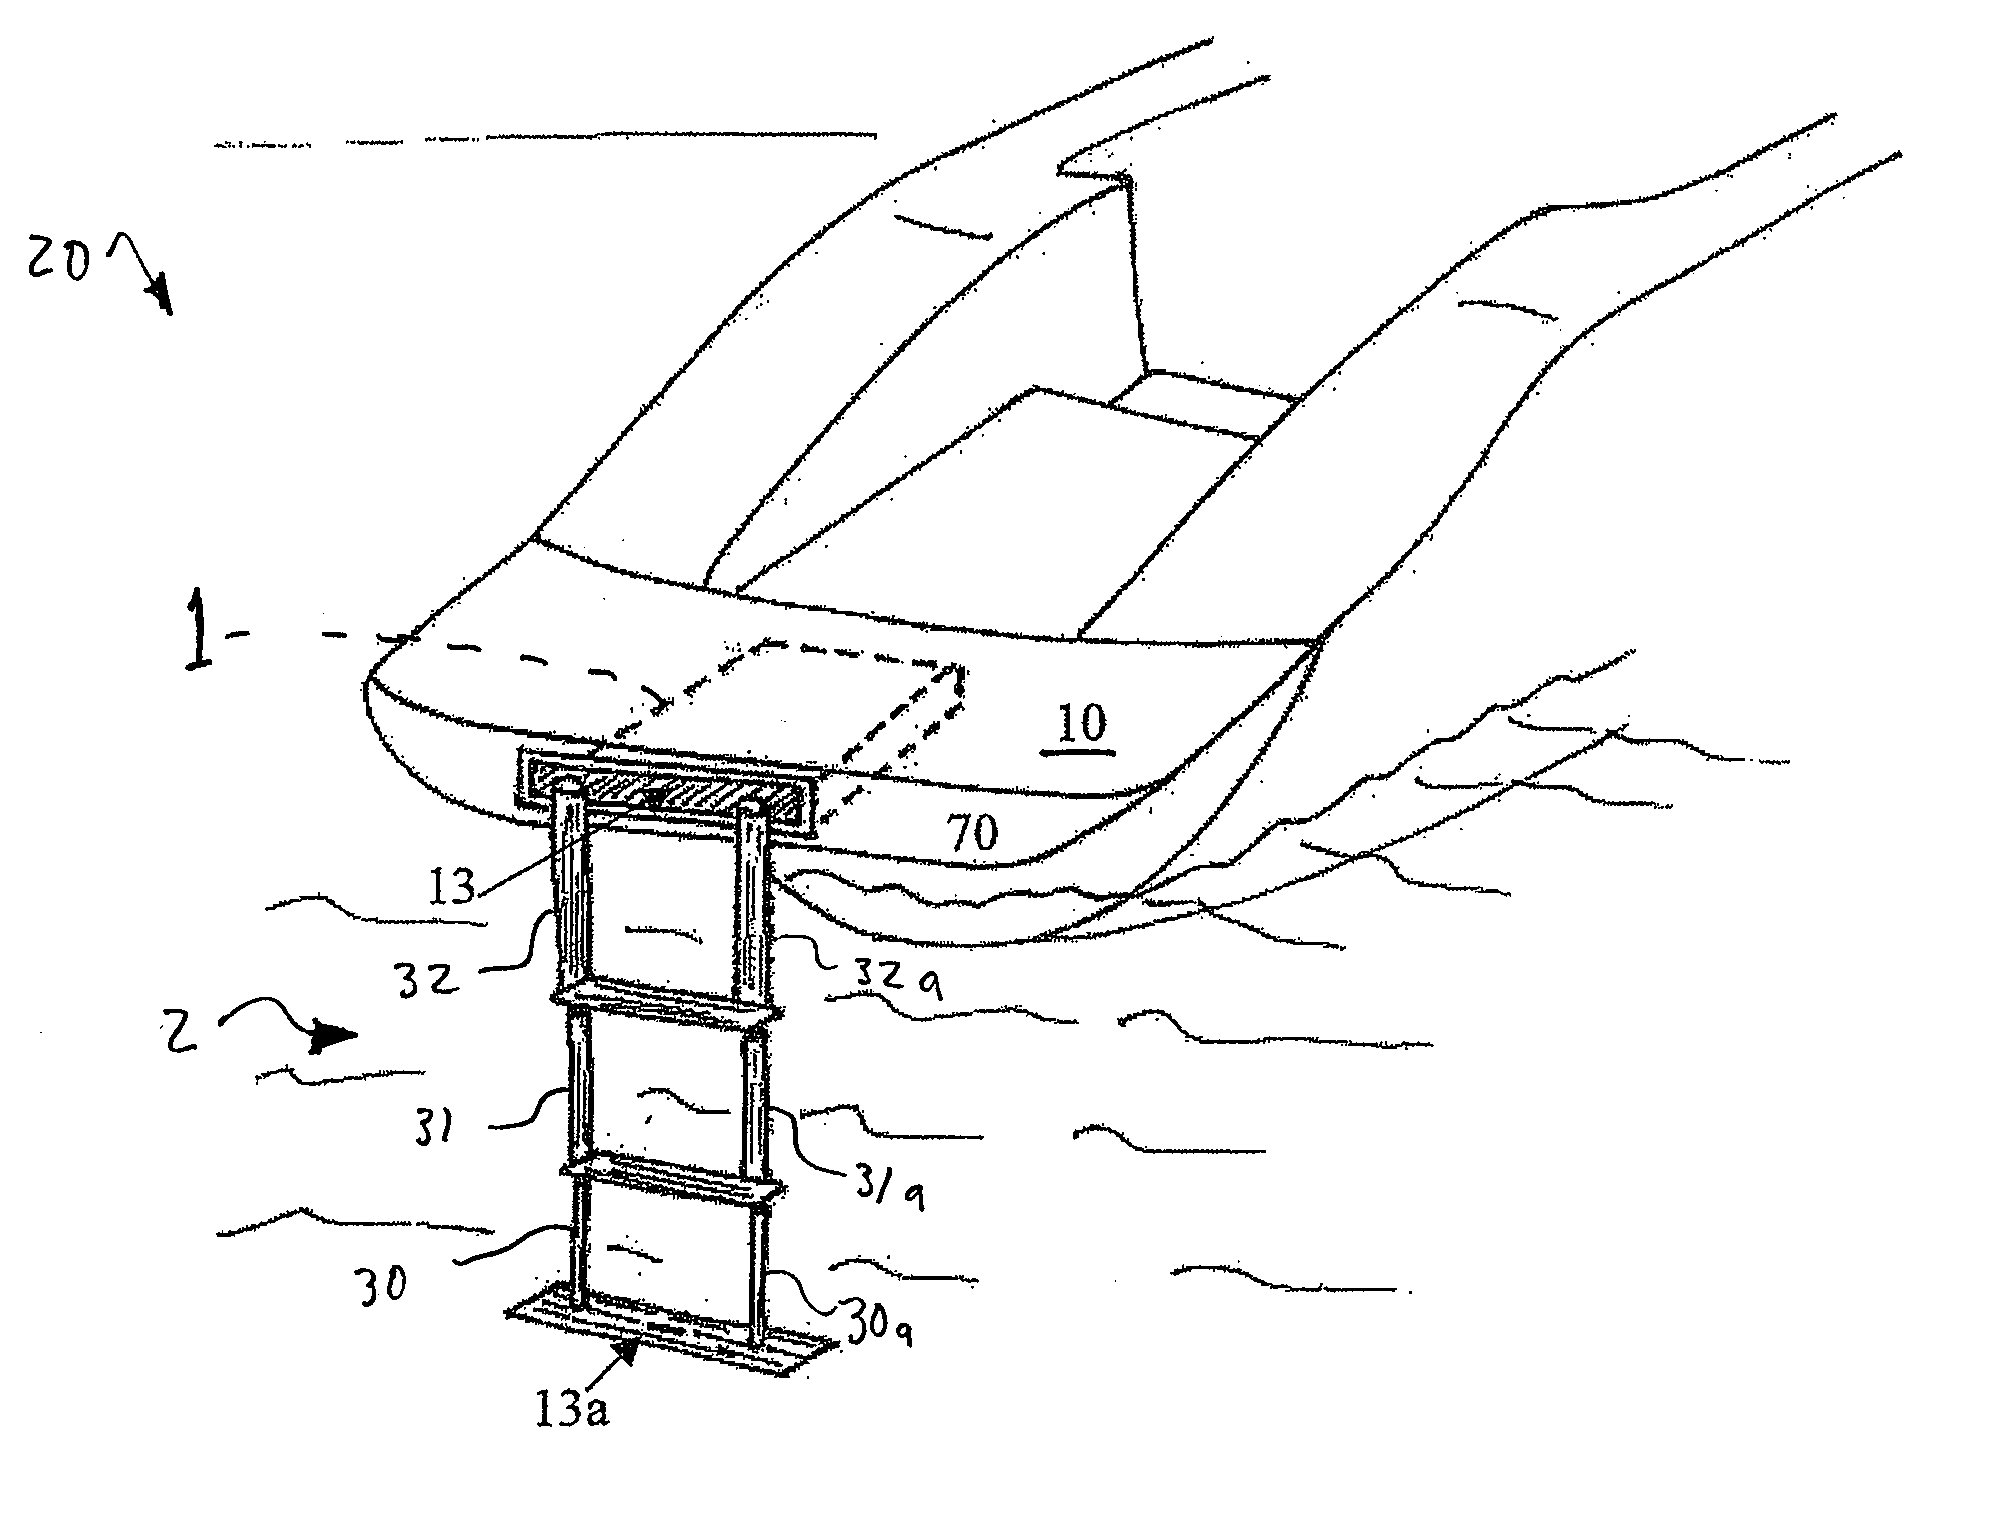 Boarding system with retractable ladder for yachting boats